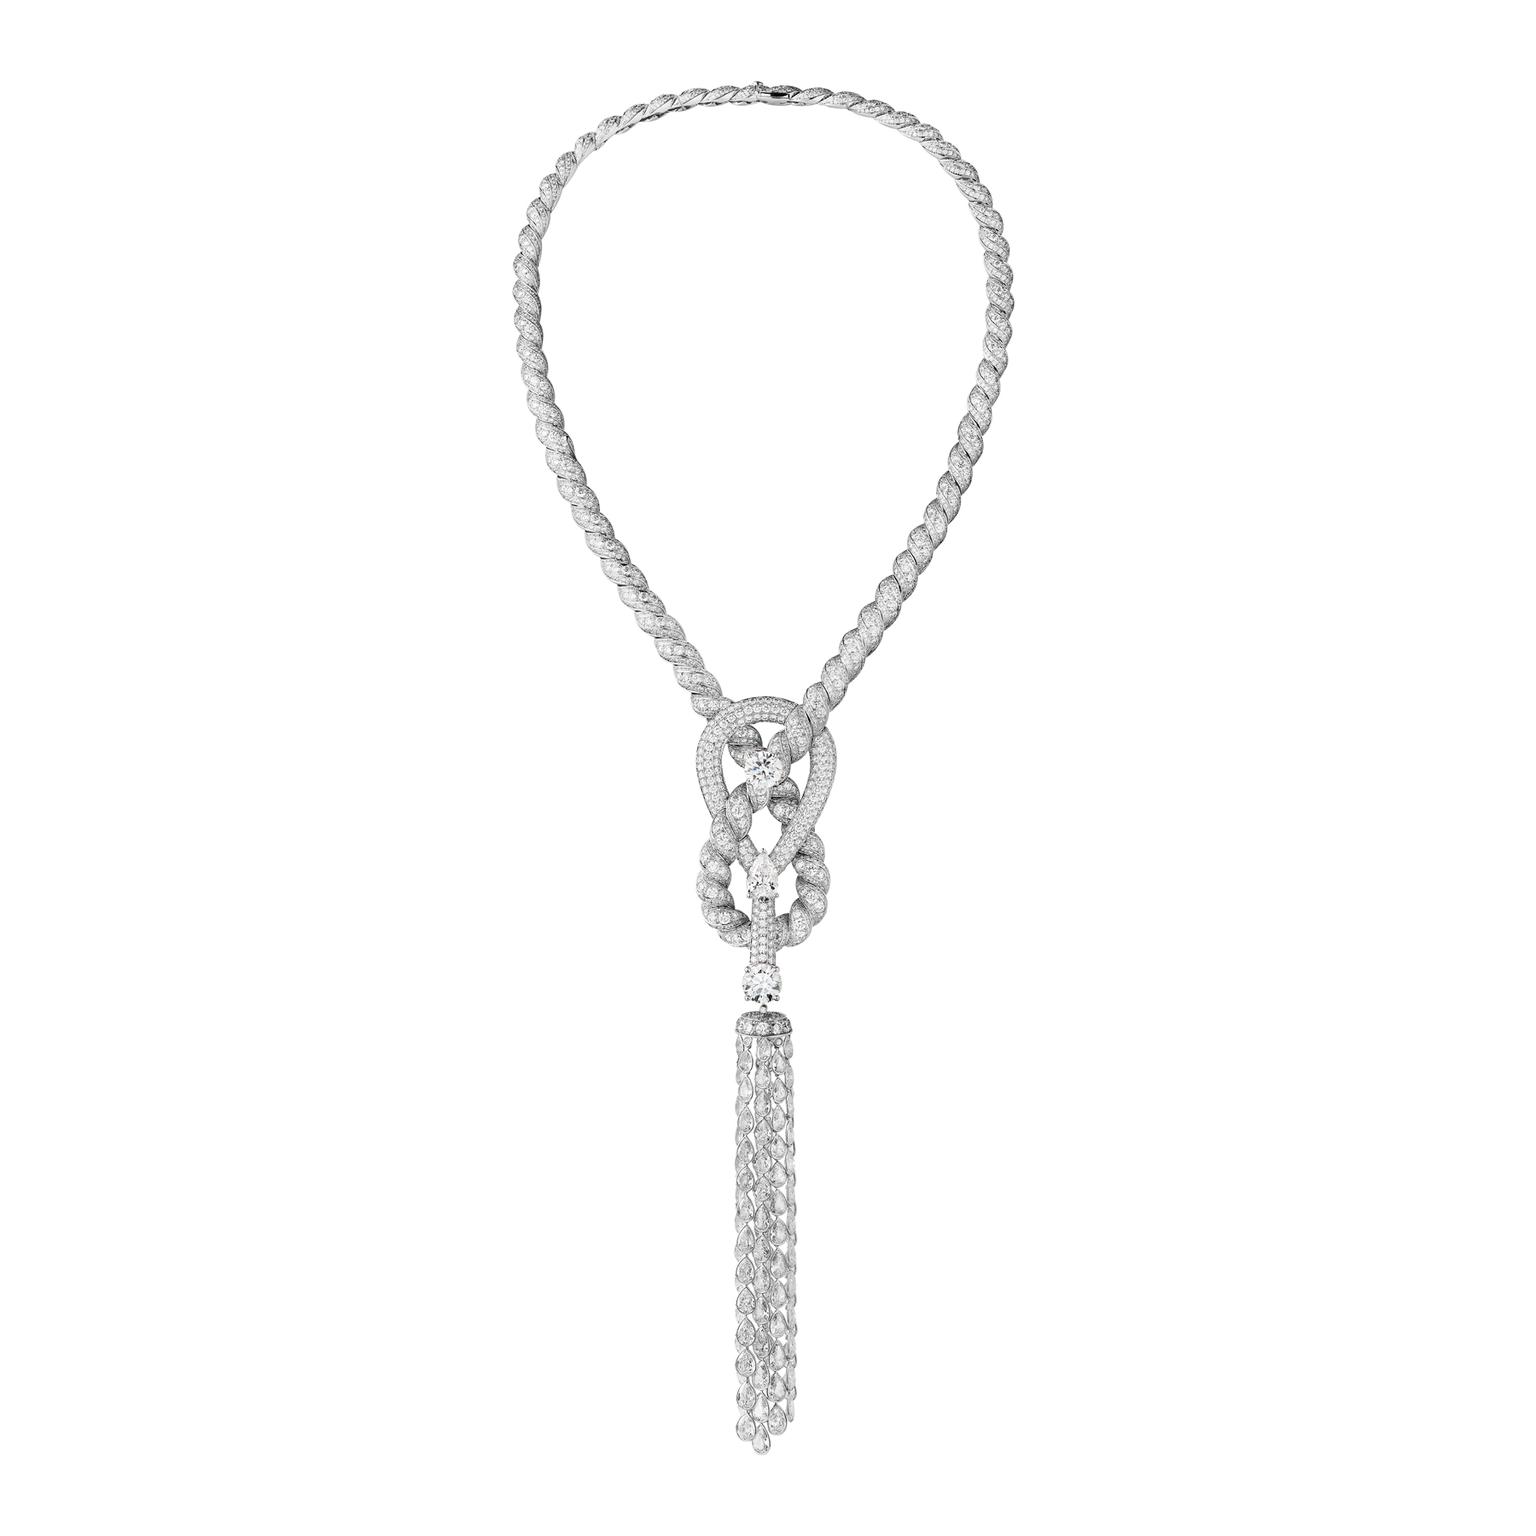 Chanel Flying Cloud Endless Knot necklace